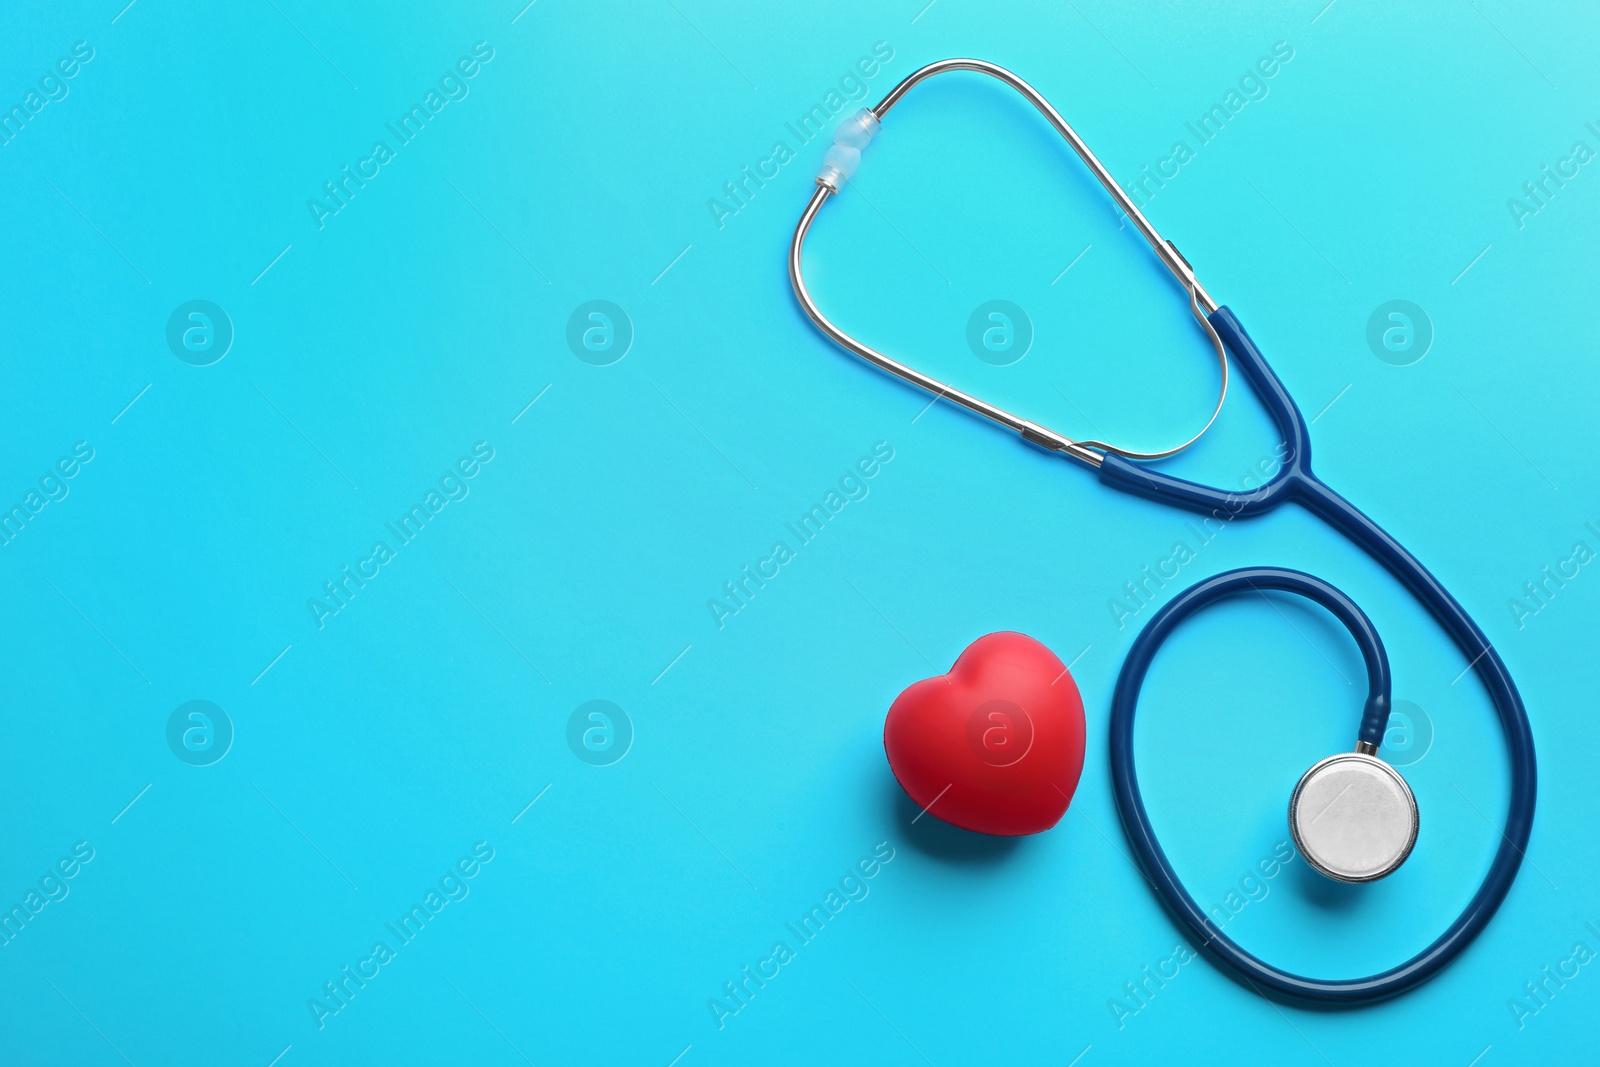 Photo of Stethoscope and red heart on blue background, flat lay with space for text